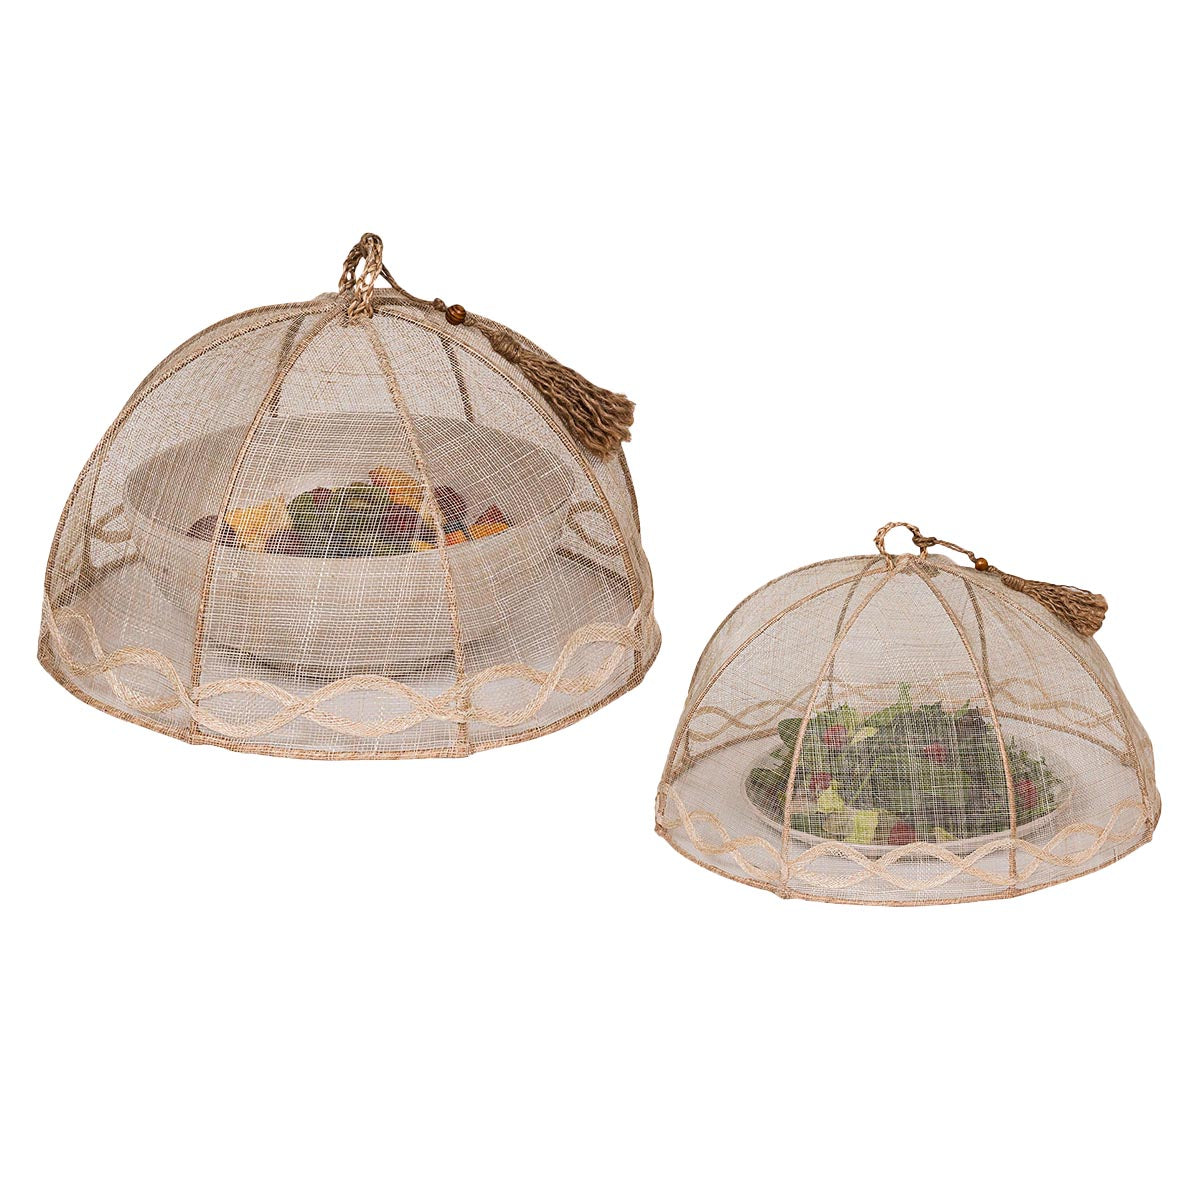 Tuileries Garden Mesh Round Food Cover in Natural, Set of 2